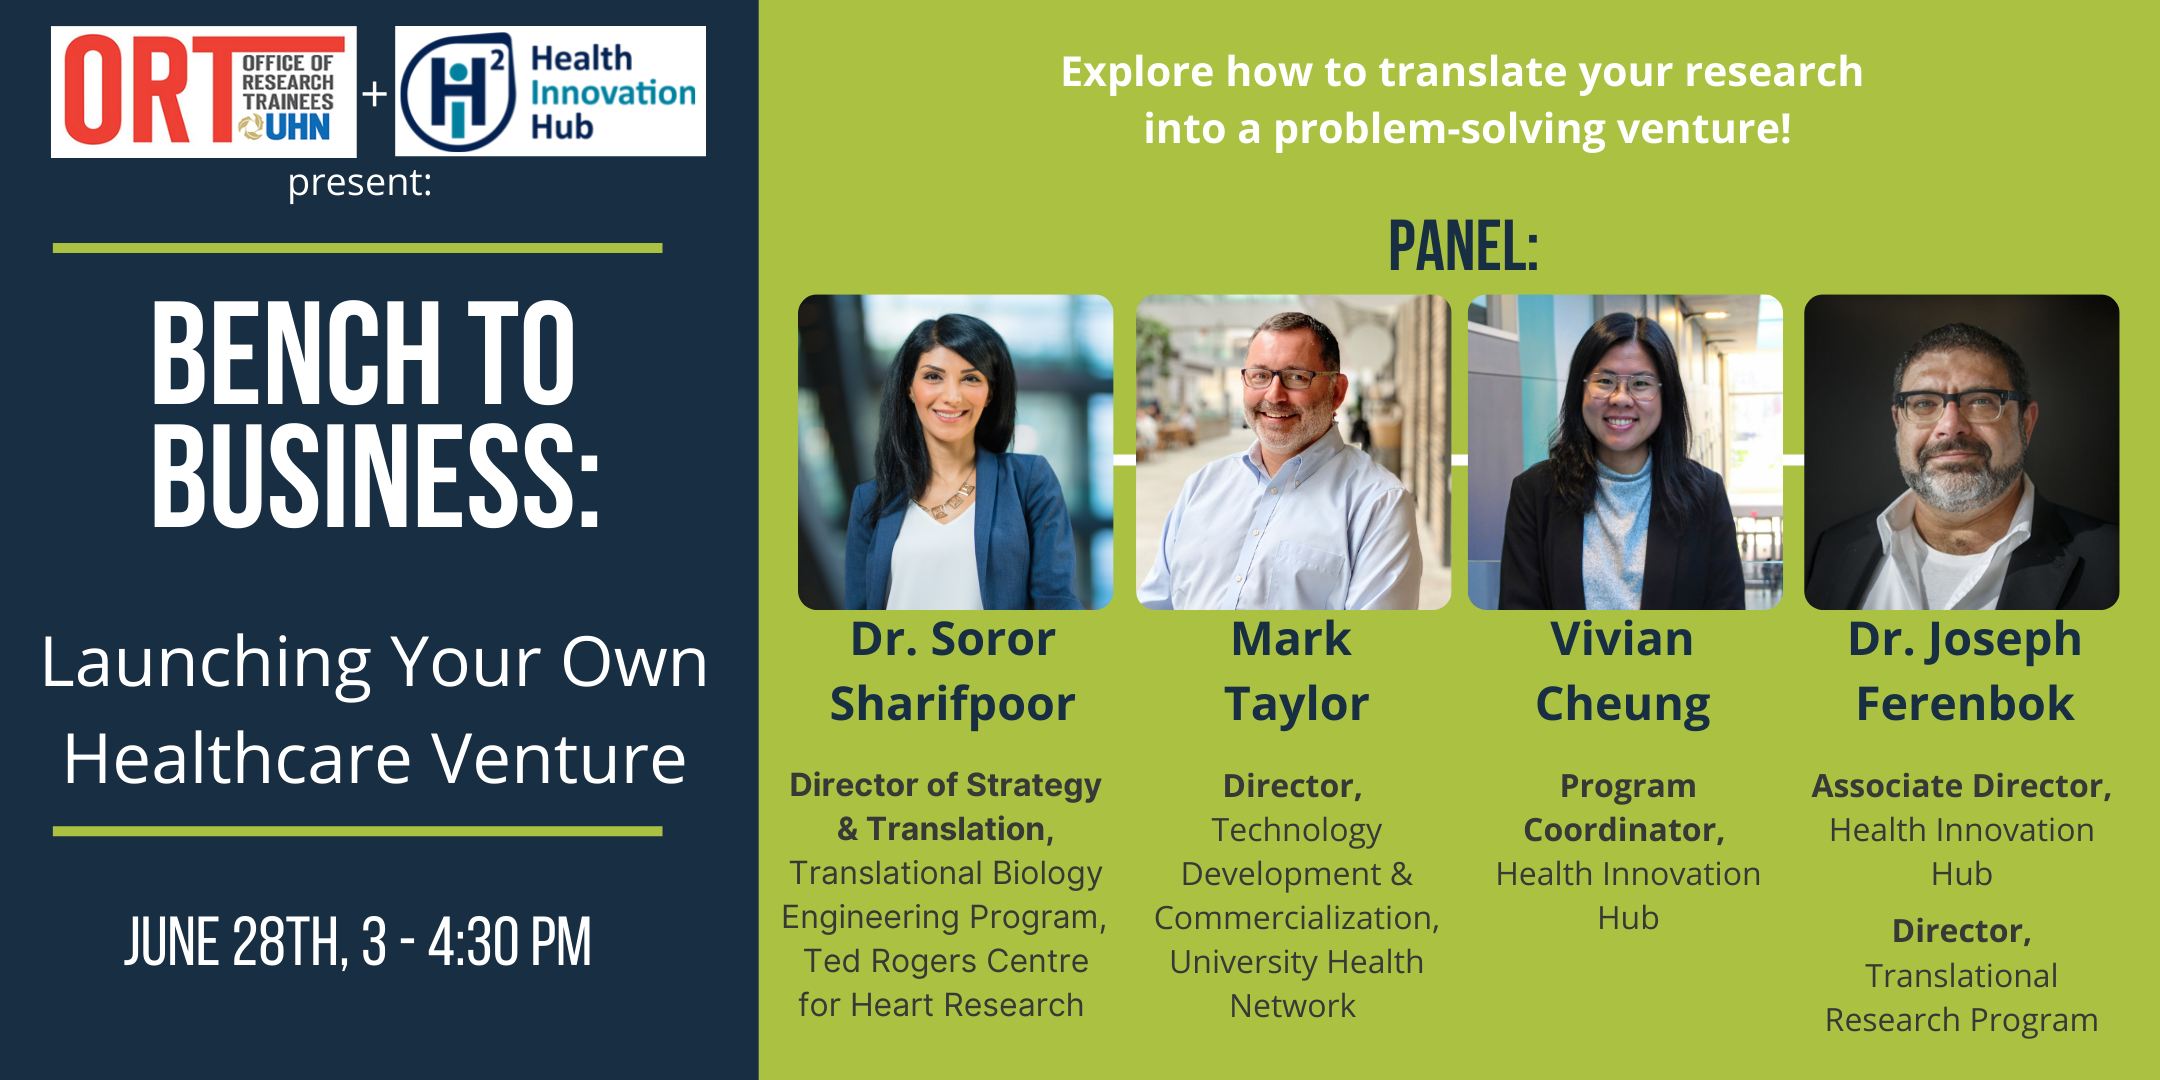 A poster for the Office of Research Trainees' Bench to Business: Launching your own healthcare venture event on June 28th from 3 to 4:30 pm. On the right are photos and descriptions of the 4 panelists, Dr. Soror Sharifpoor, Mark Taylor, Vivian Cheung, and Dr. Joseph Ferenbok.